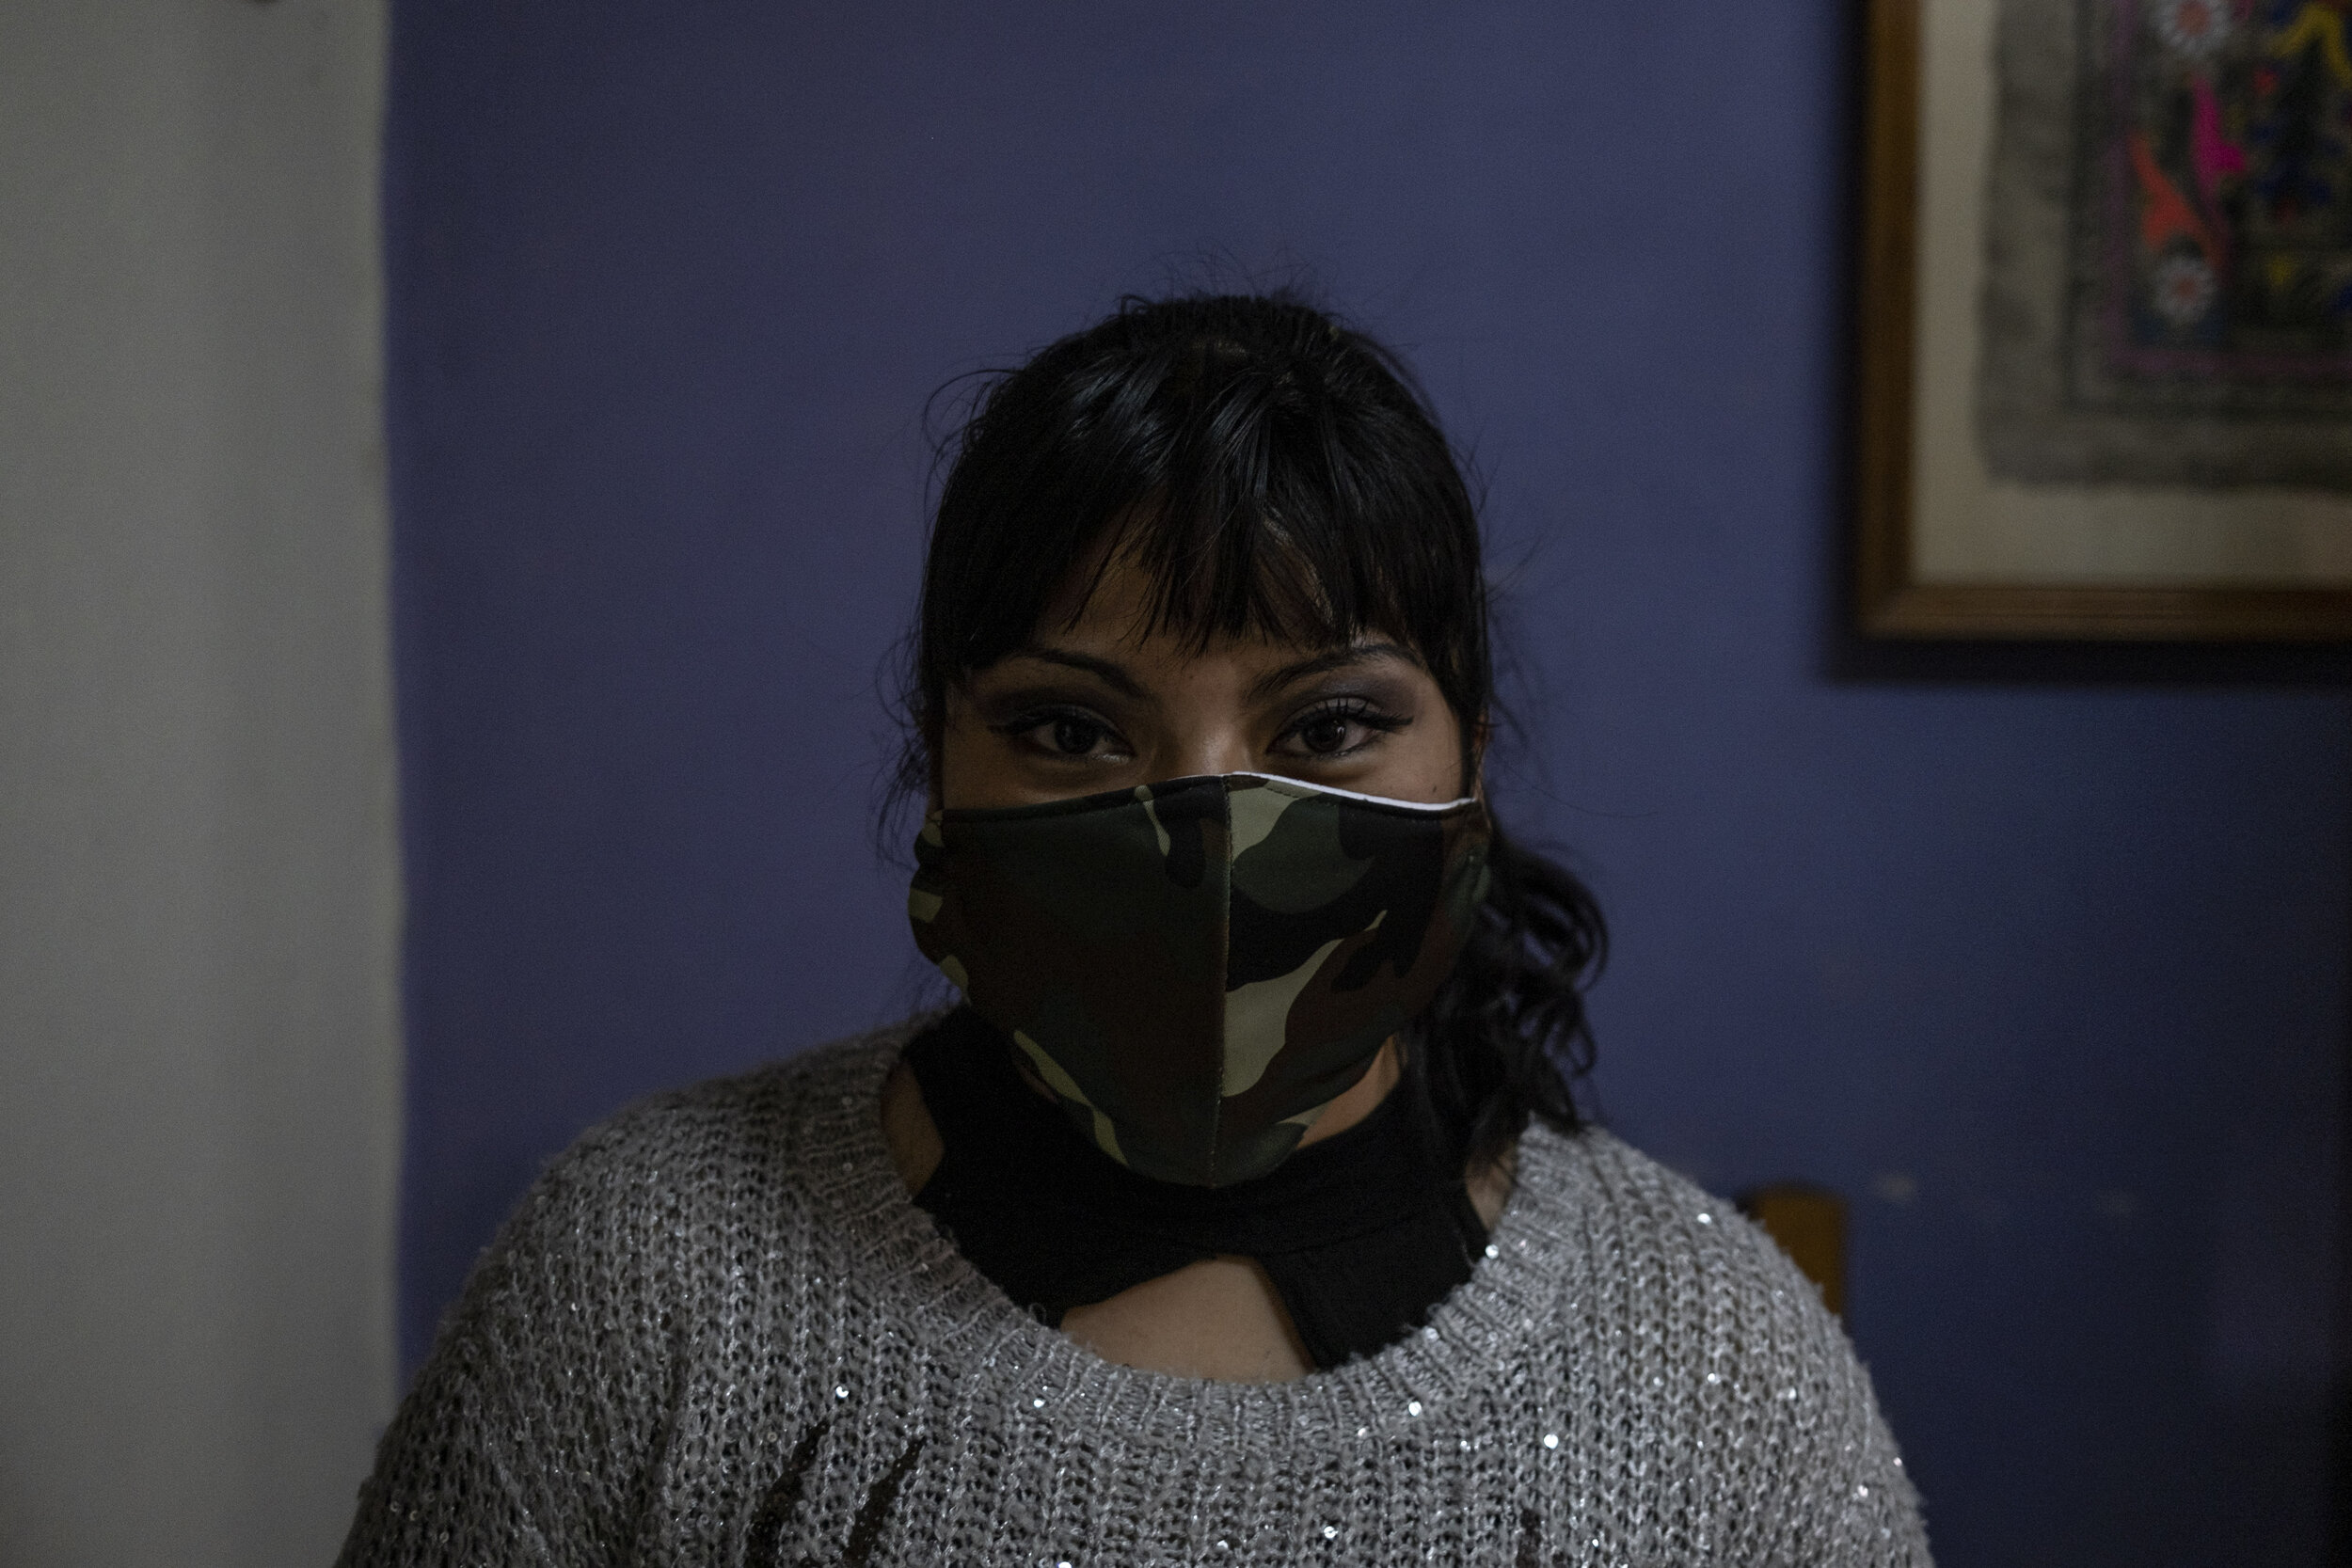    Carmen poses at a women’s shelter. The confinement brought on by the pandemic has implied an increase in gender-based violence against women, with a nationwide increase of 71% of female users at risk compared to 2019 .  